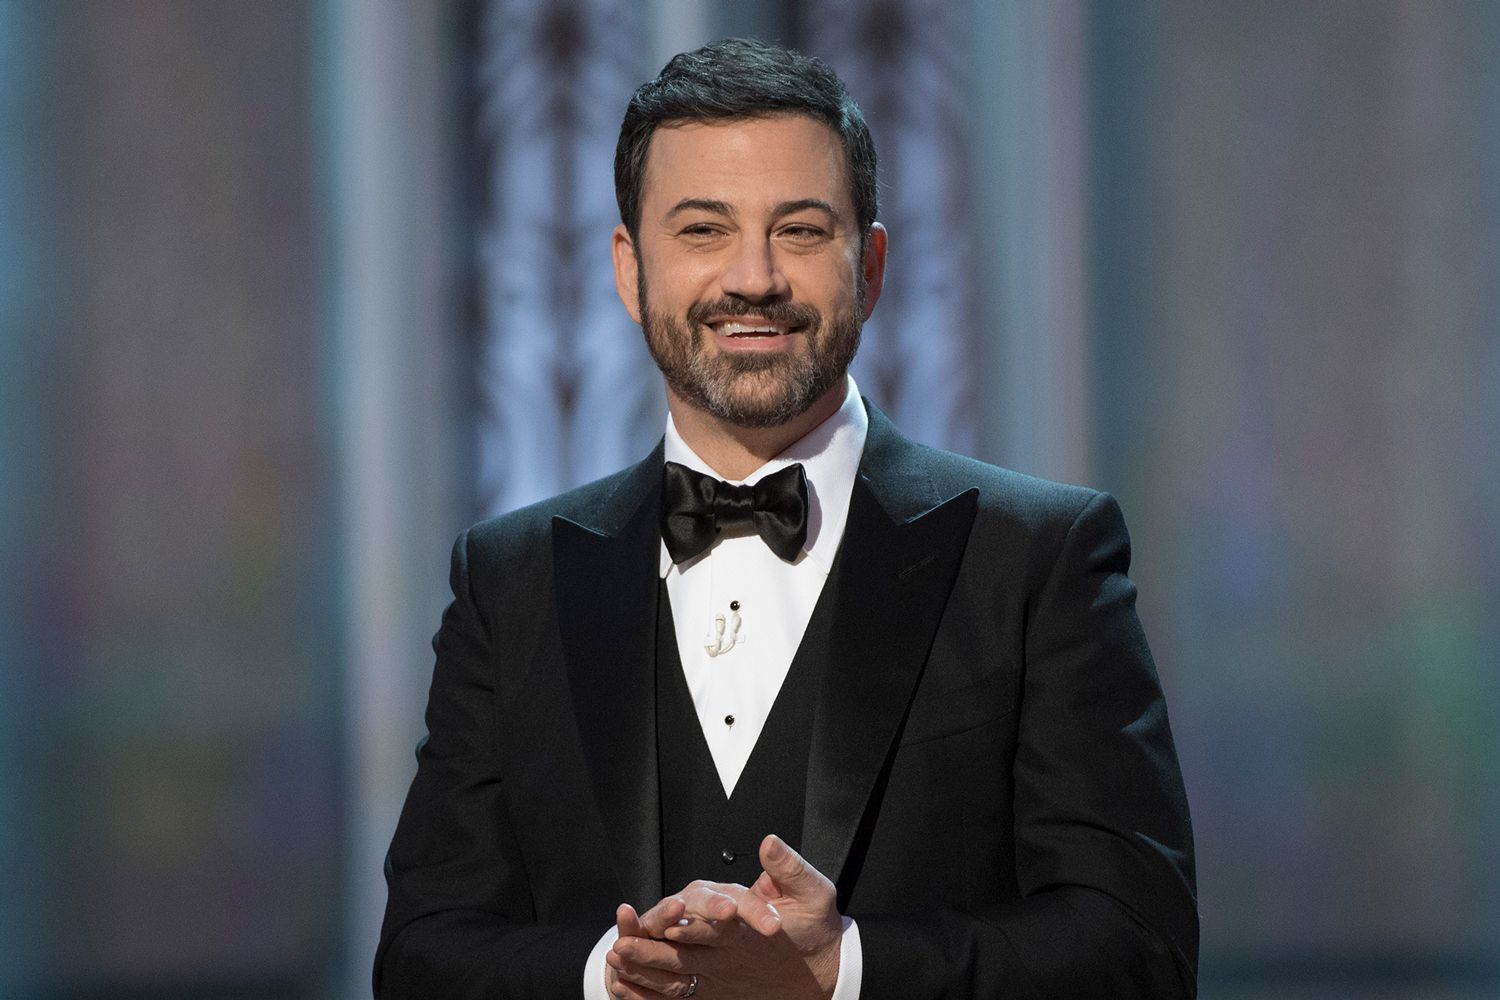 Jimmy Kimmel Mocks: Names the Most 'Embarrassing' Trump Family Member – Guess Who?

